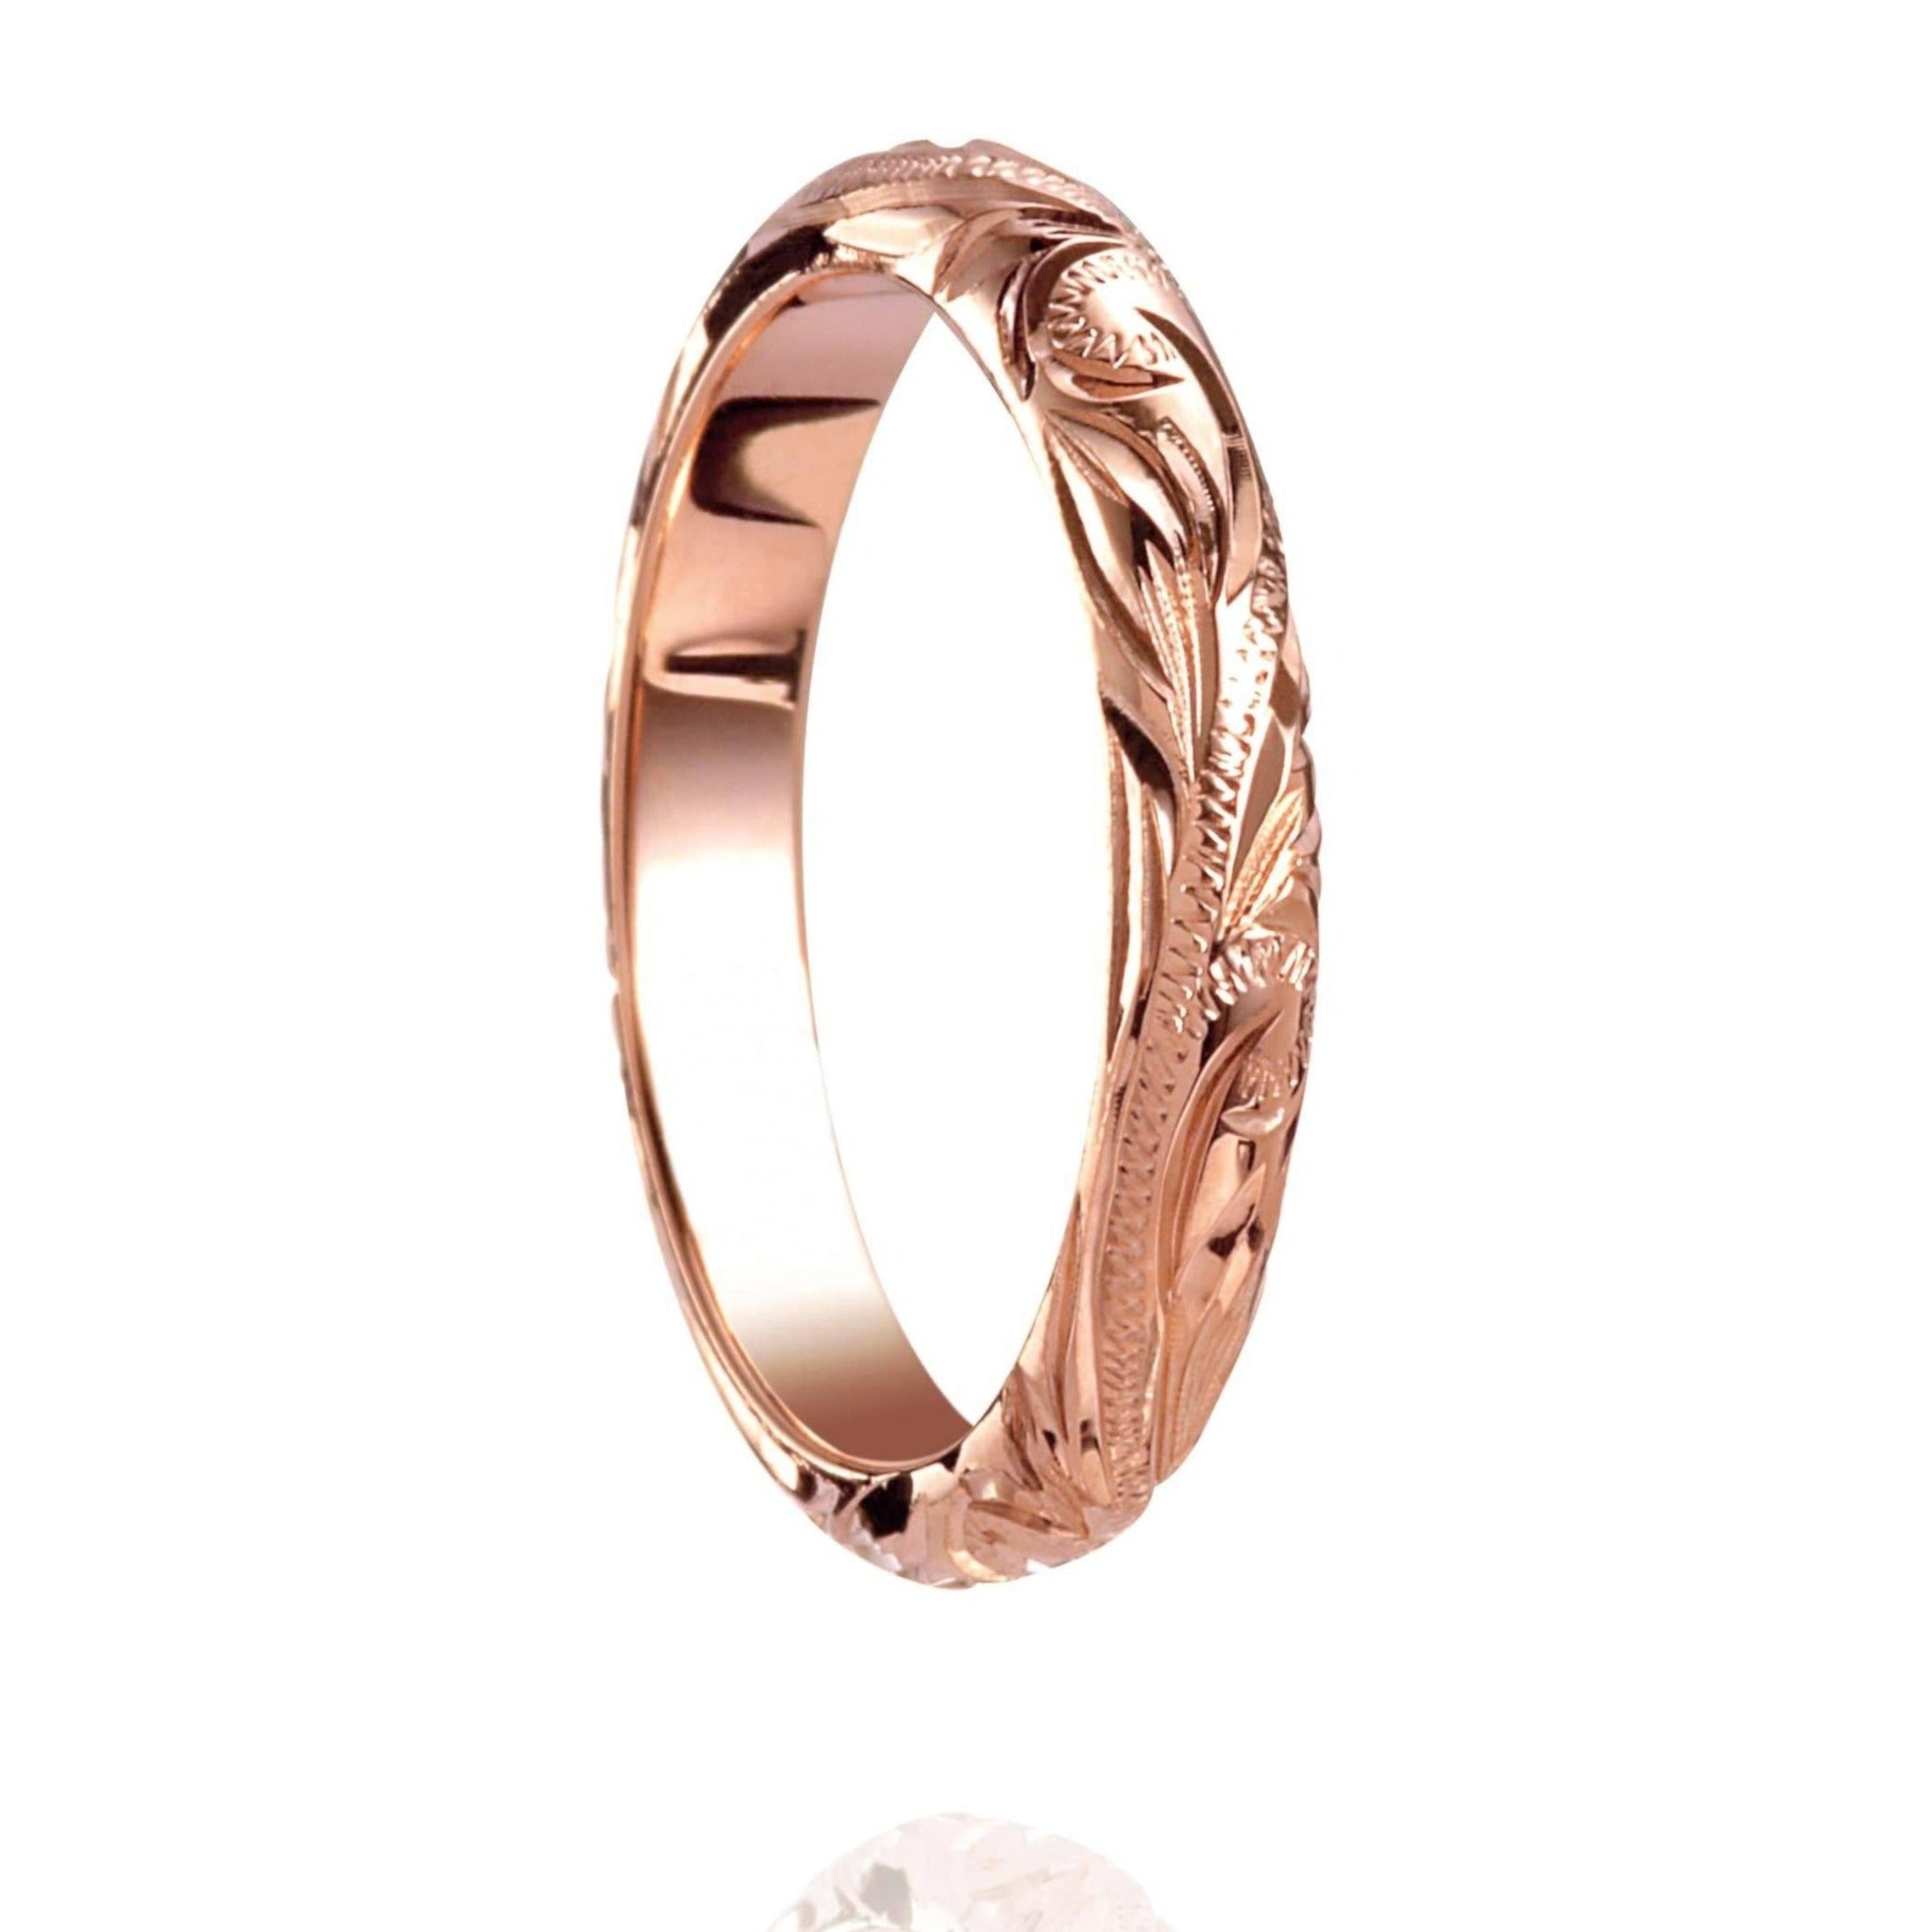 The picture shows a 14K rose gold infinity ring with hand-engraved detailing.